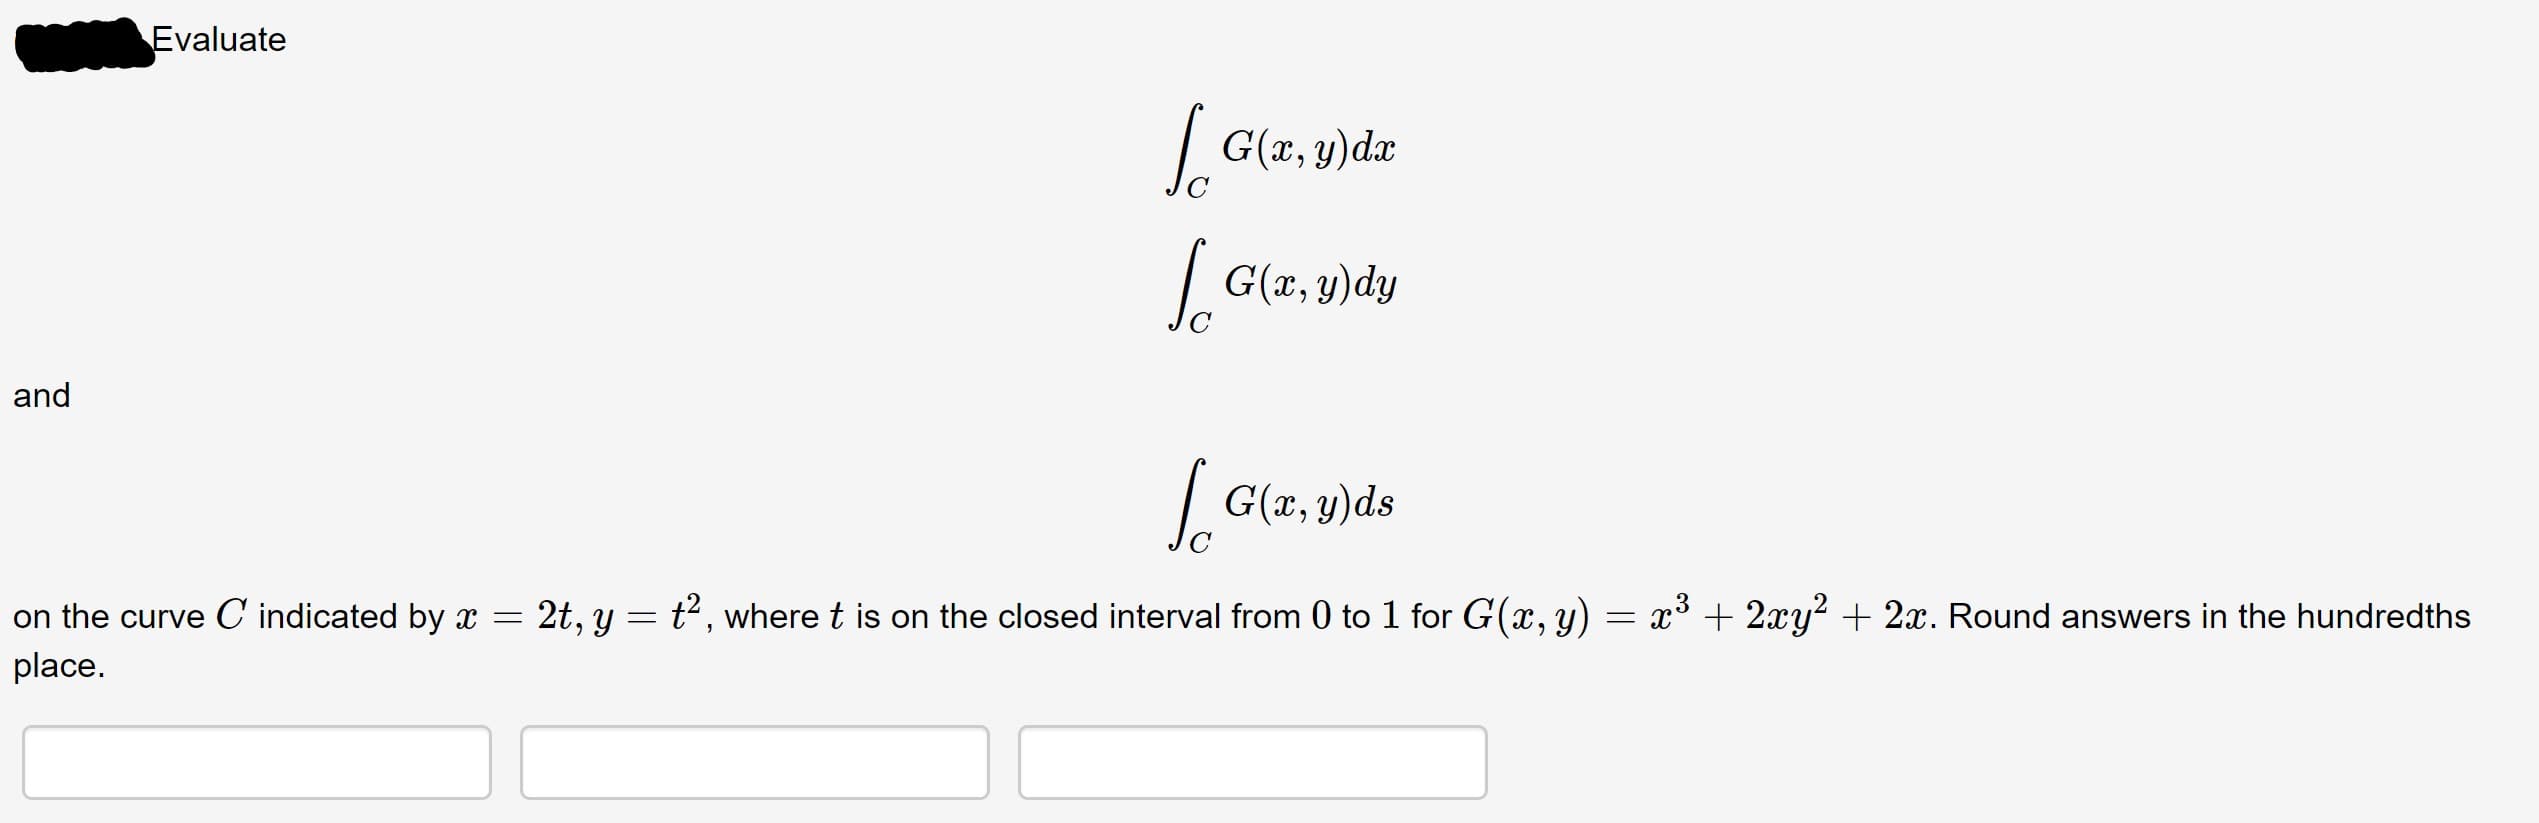 Evaluate
| G(x, y)dx
| G(x, y)dy
and
| G(x, y)ds
2t, y = t2, where t is on the closed interval from 0 to 1 for G(x, y) = x³ + 2xy? + 2x. Round answers in the hundredths
on the curve C indicated by x =
place.
